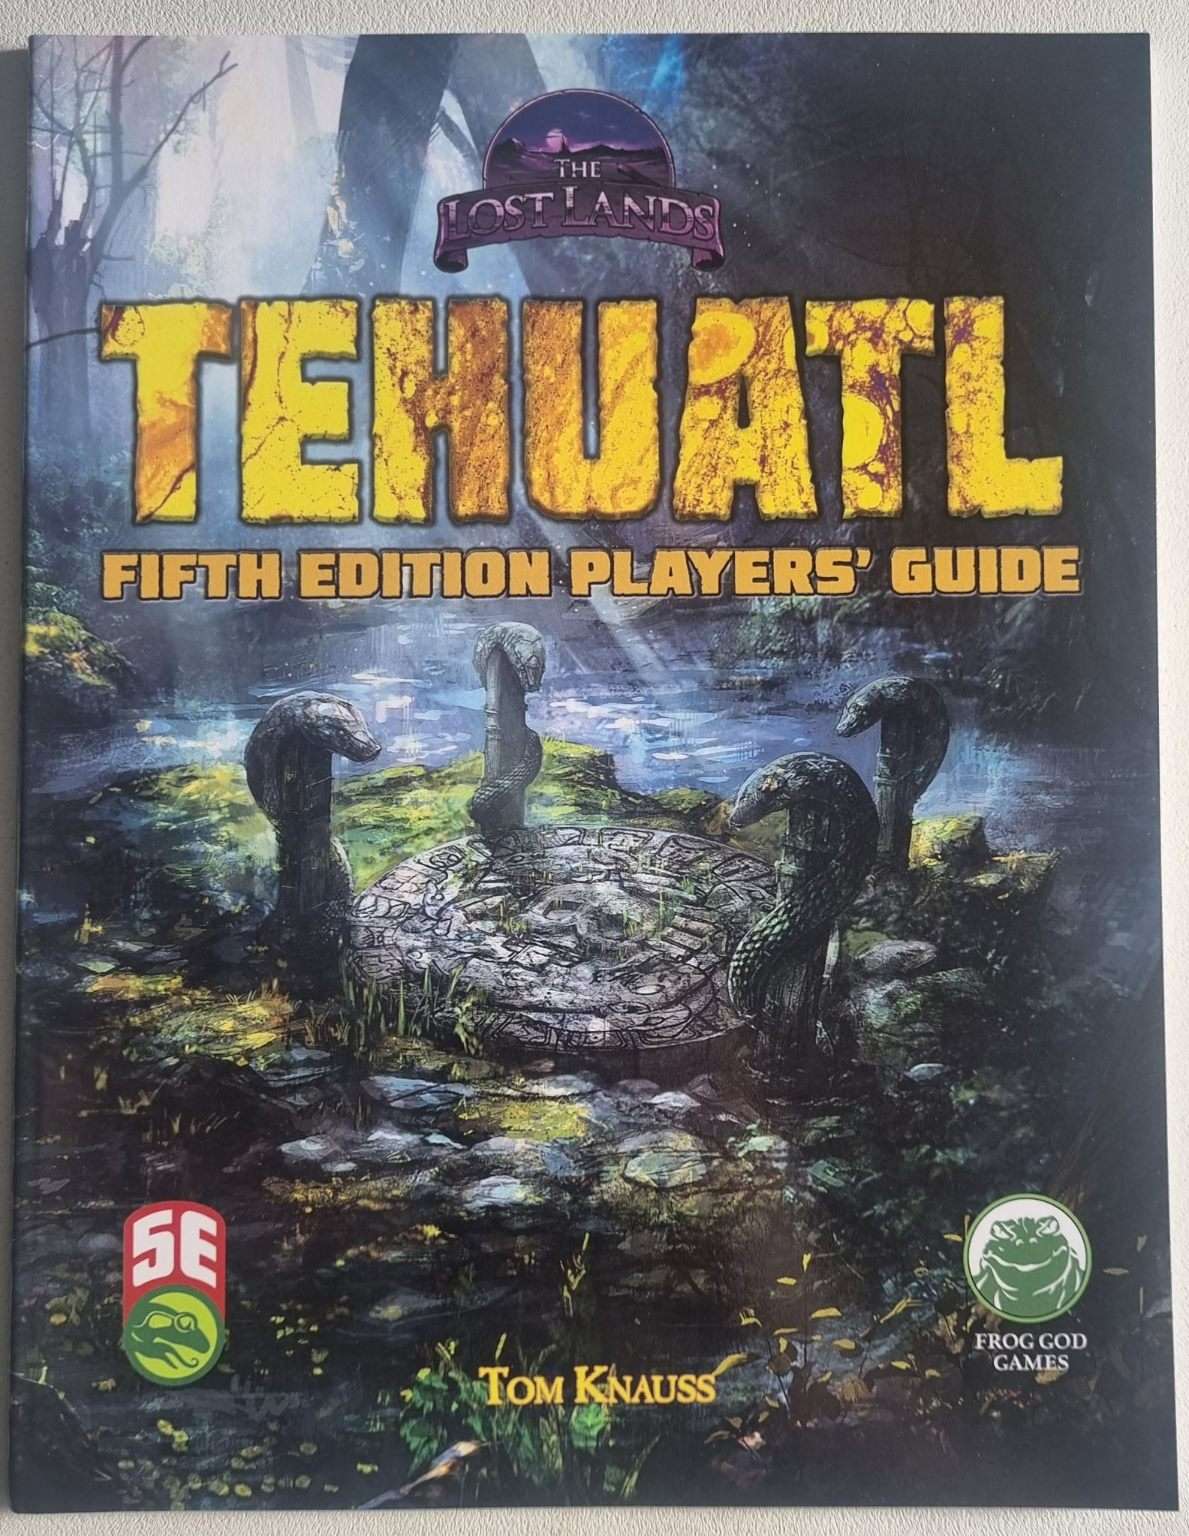 The Lost Lands: Tehuatl Player's Guide - D&D 5th Edition 5e